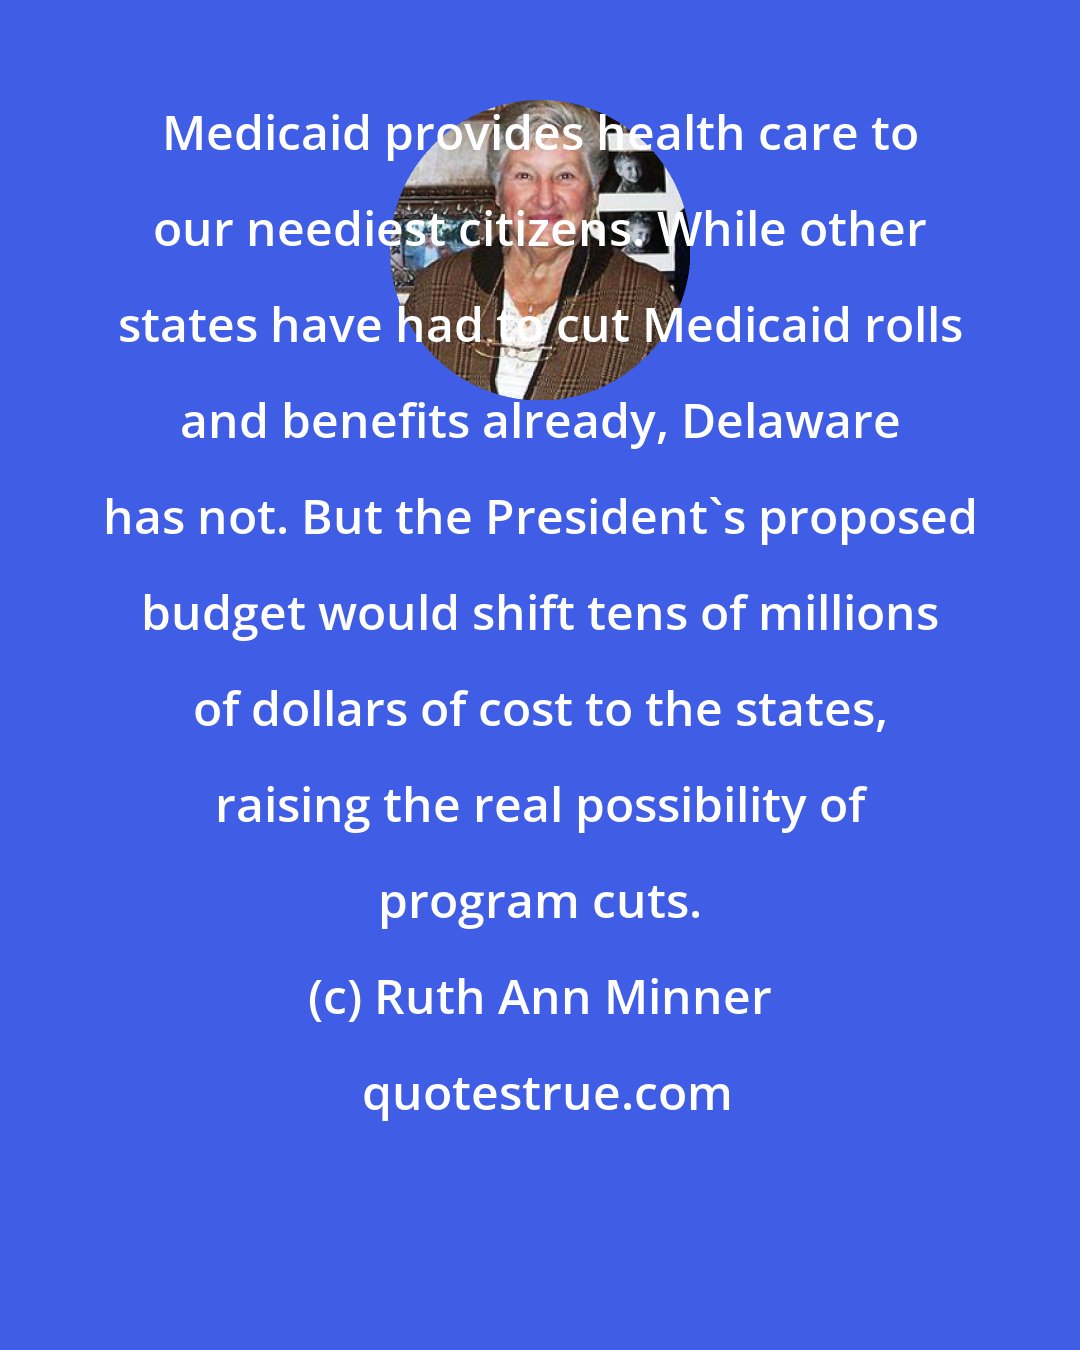 Ruth Ann Minner: Medicaid provides health care to our neediest citizens. While other states have had to cut Medicaid rolls and benefits already, Delaware has not. But the President's proposed budget would shift tens of millions of dollars of cost to the states, raising the real possibility of program cuts.